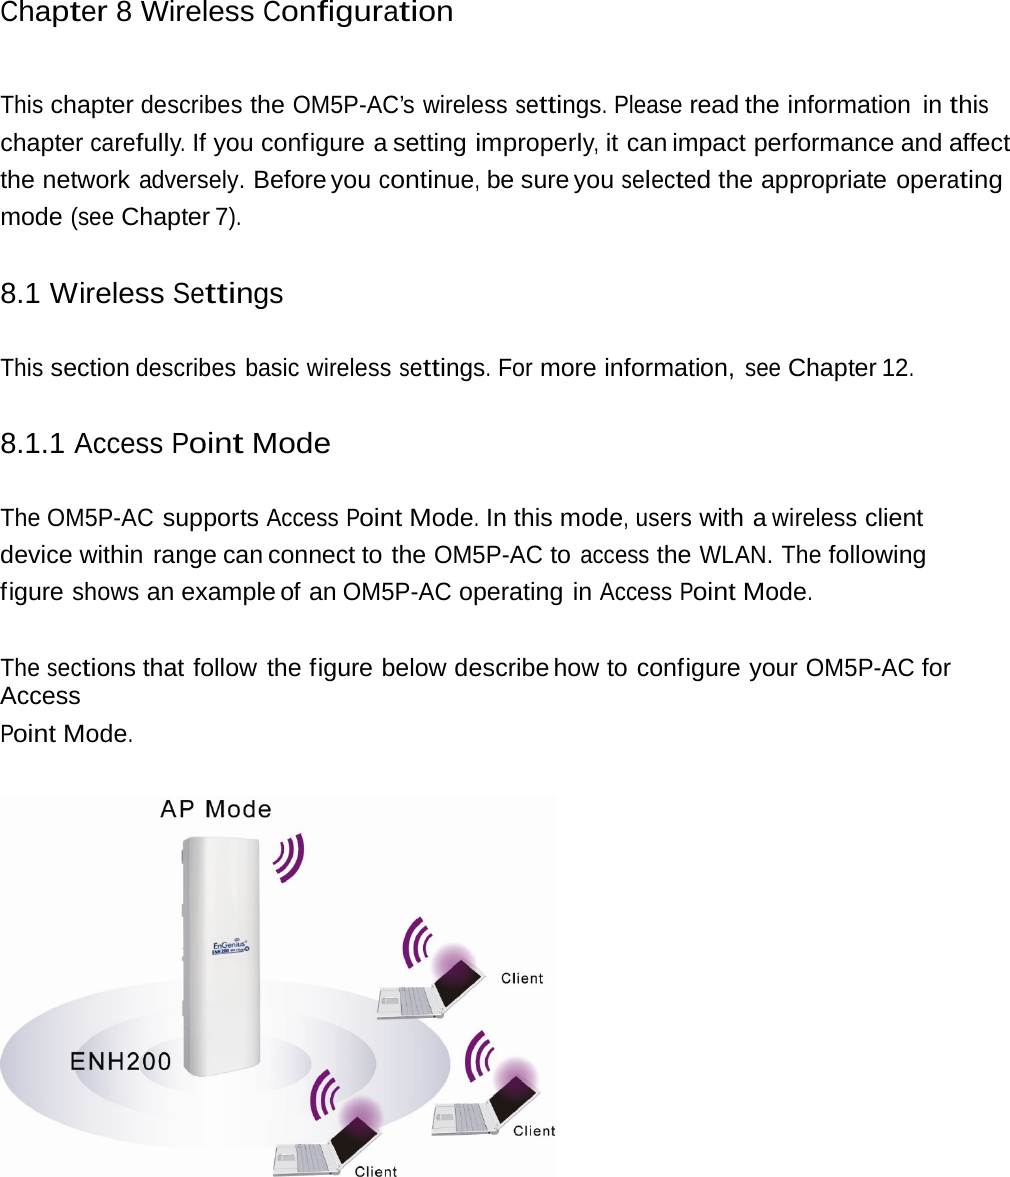 Chapter 8 Wireless Configuration This chapter describes the OM5P-AC’s wireless settings. Please read the information  in this chapter carefully. If you configure a setting improperly, it can impact performance and affect the network adversely. Before you continue, be sure you selected the appropriate operating mode (see Chapter 7). 8.1 Wireless Settings This section describes basic wireless settings. For more information, see Chapter 12. 8.1.1 Access Point Mode The OM5P-AC supports Access Point Mode. In this mode, users with a wireless client device within range can connect to the OM5P-AC to access the WLAN. The following figure shows an example of an OM5P-AC operating in Access Point Mode. The sections that follow the figure below describe how  to  configure  your OM5P-AC for Access Point Mode.  